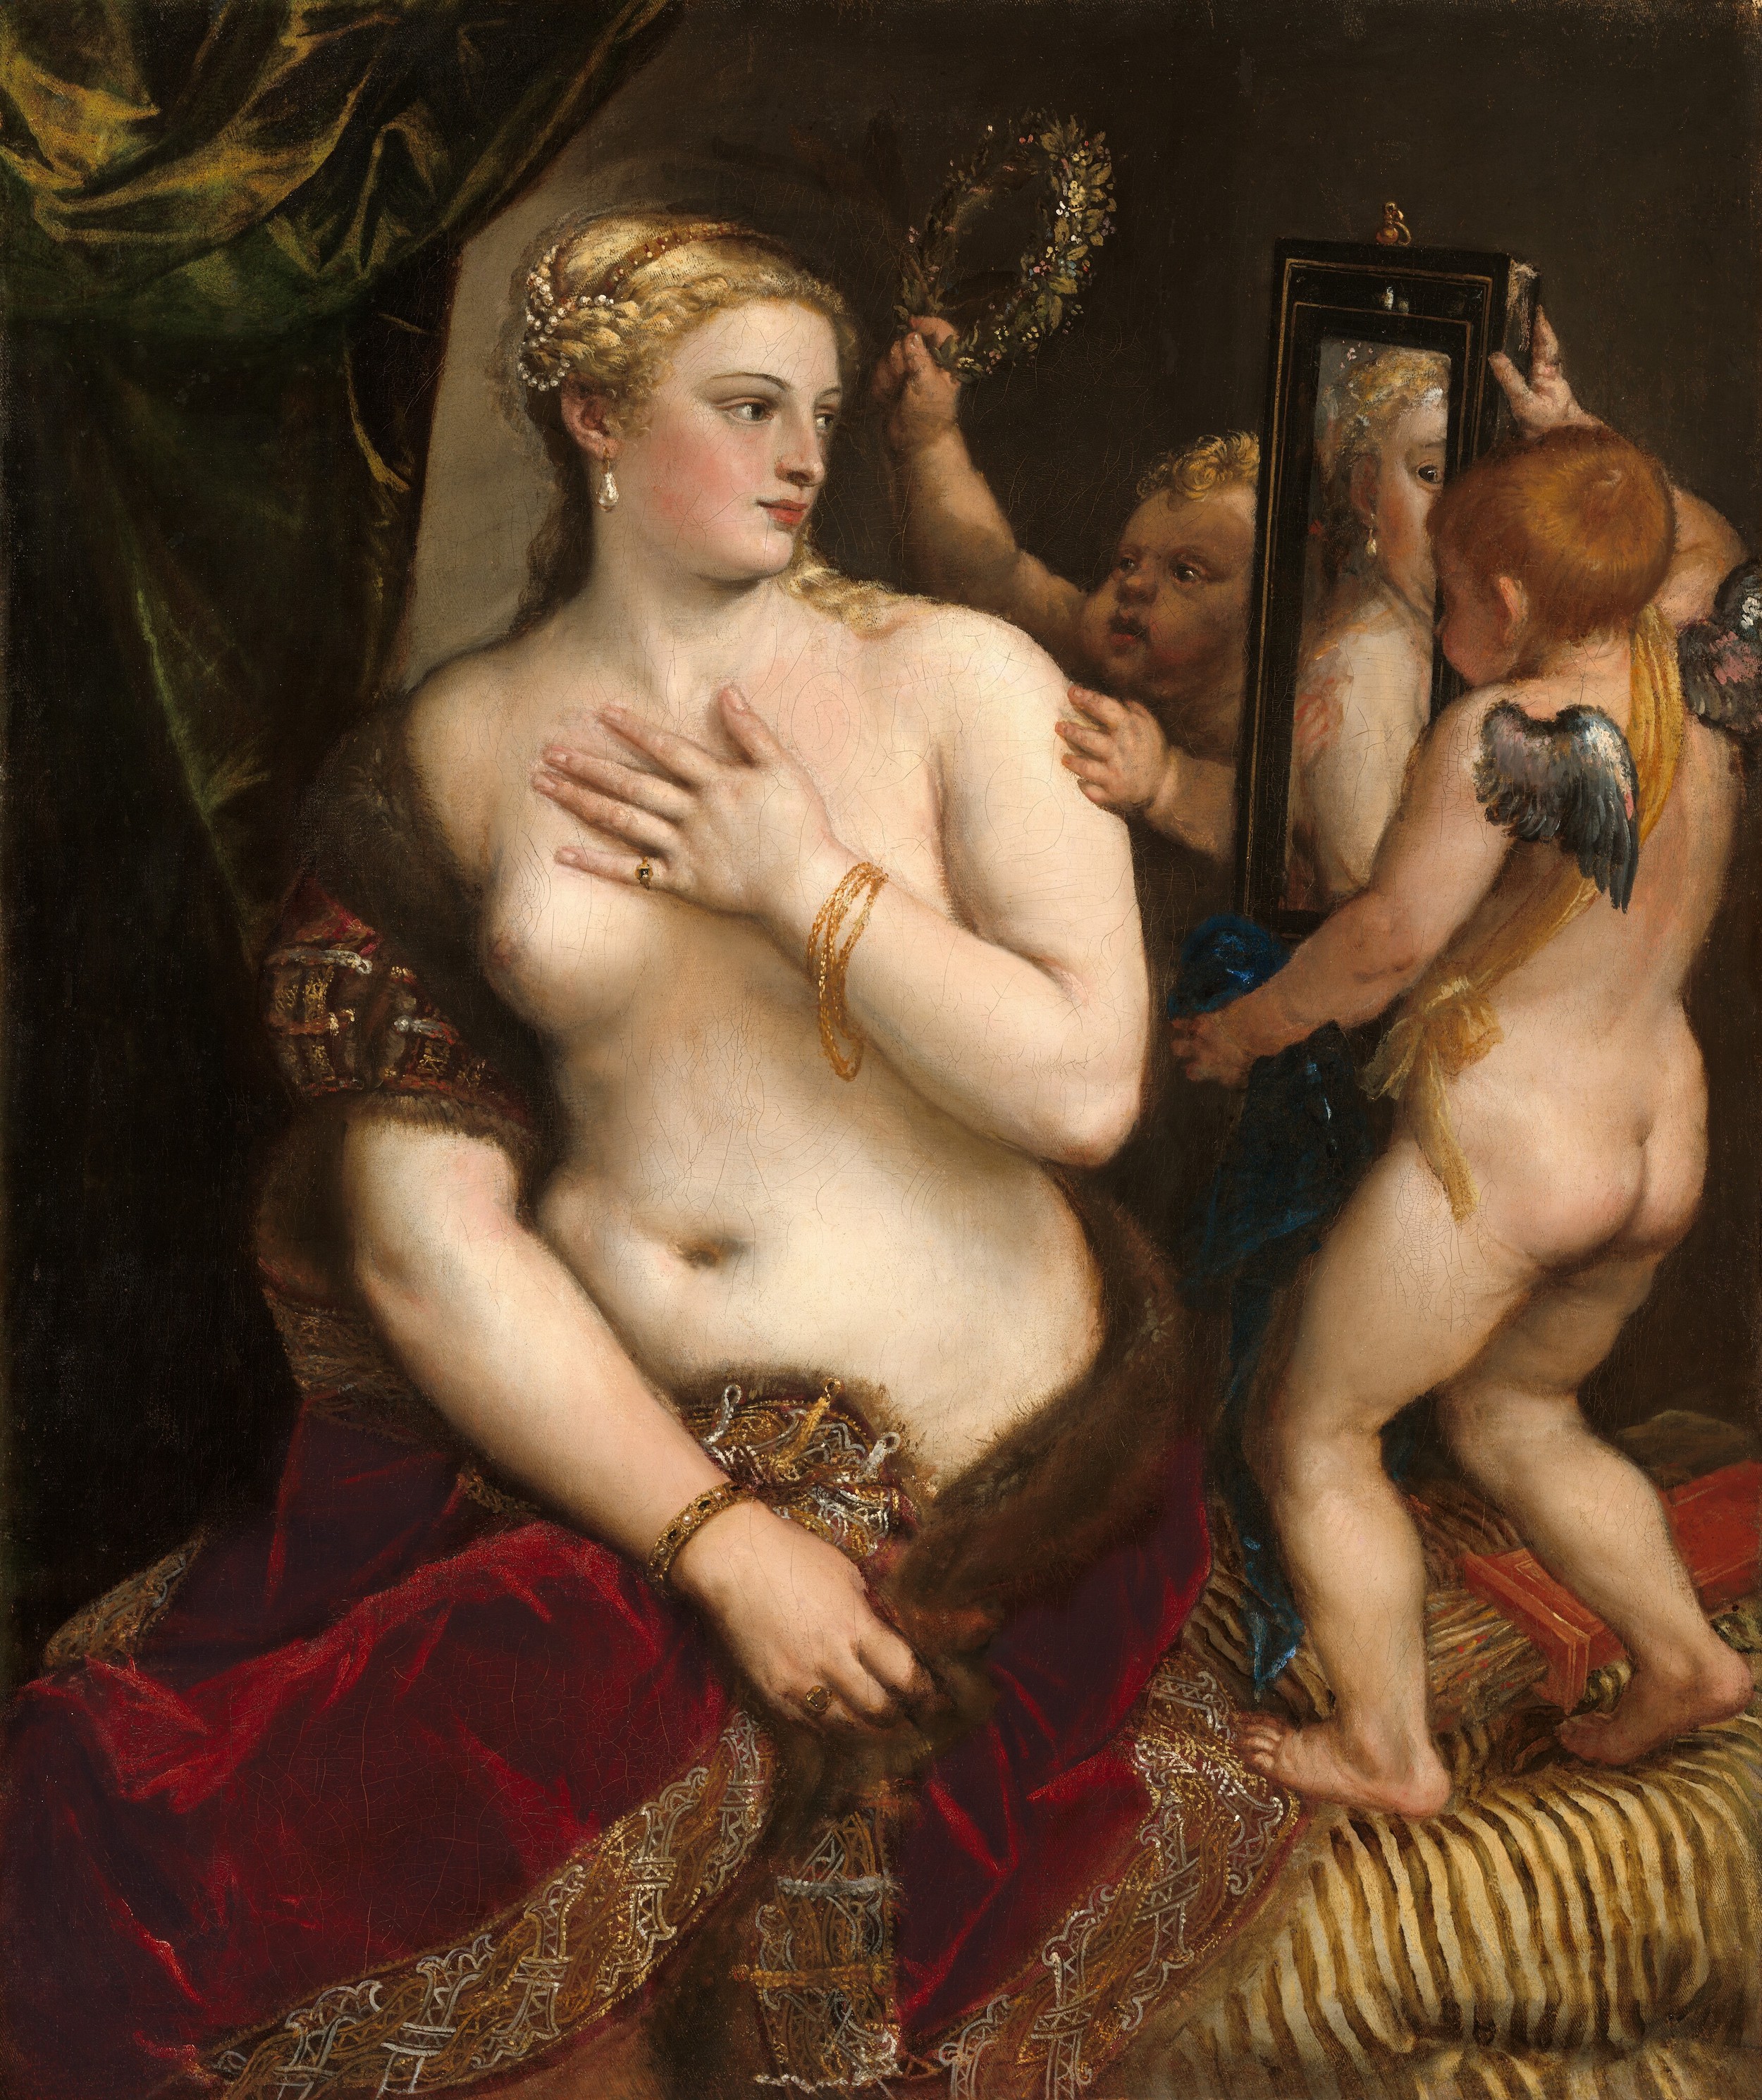 Venus with a Mirror by  Titian - c. 1555 - 124.5 x 105.5 cm National Gallery